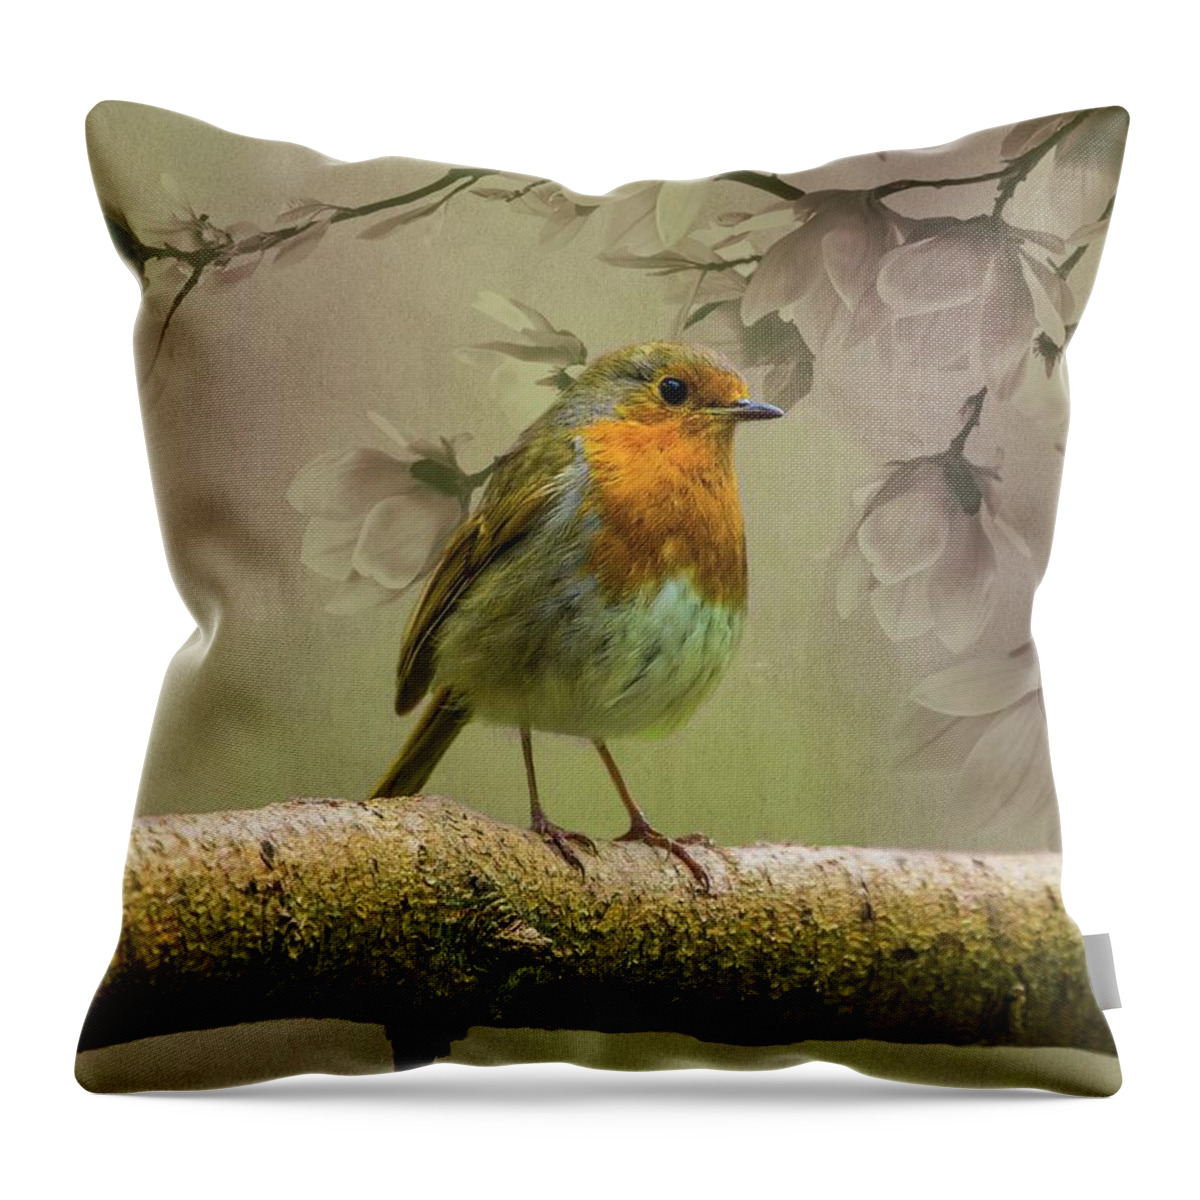 Redbreast Throw Pillow featuring the photograph Redbreast Bird by Movie Poster Prints